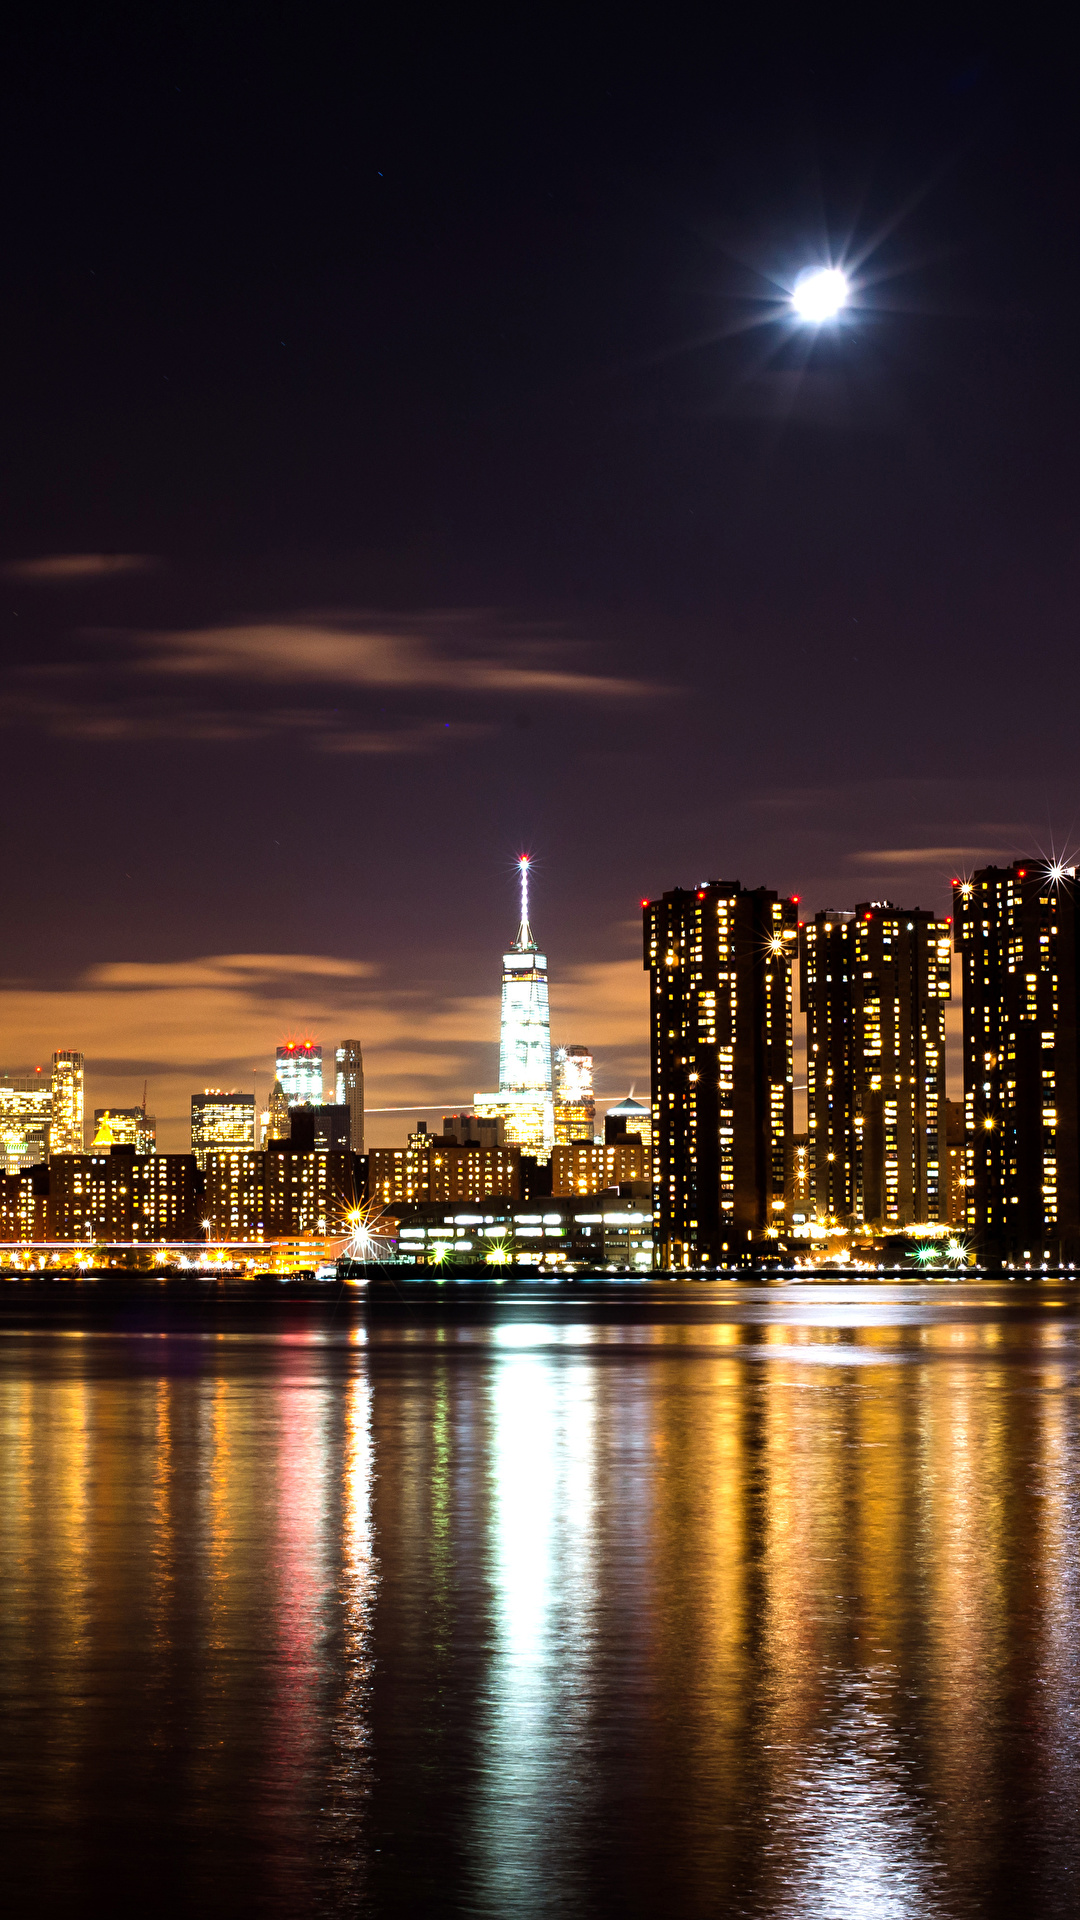 Images New York City USA Moon Cove night time Houses 1080x1920